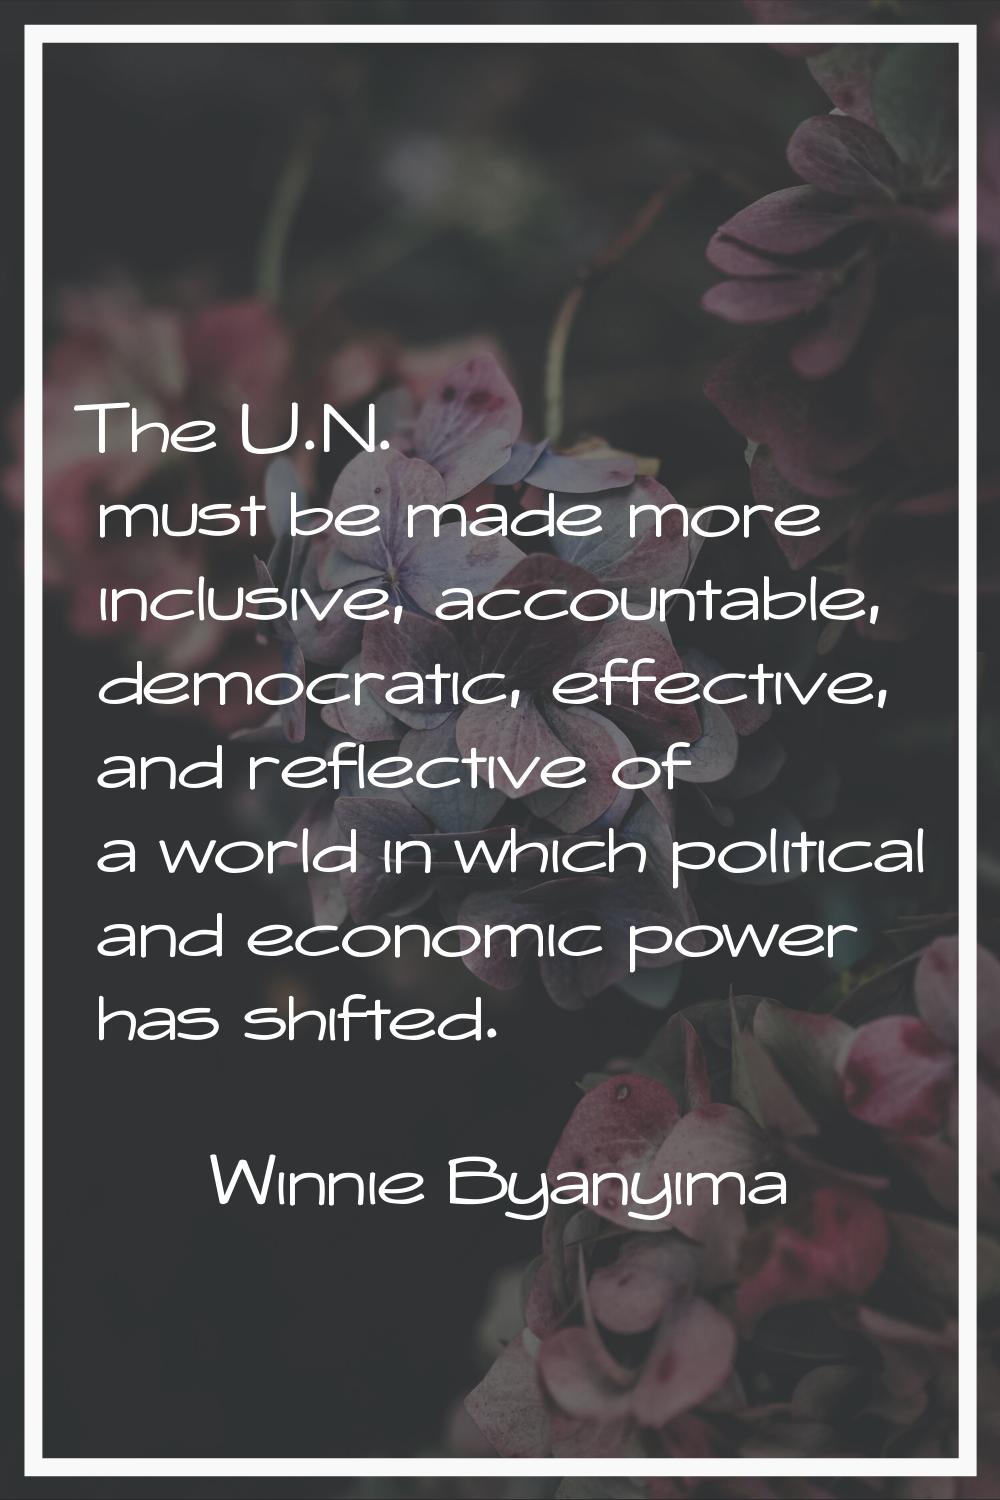 The U.N. must be made more inclusive, accountable, democratic, effective, and reflective of a world